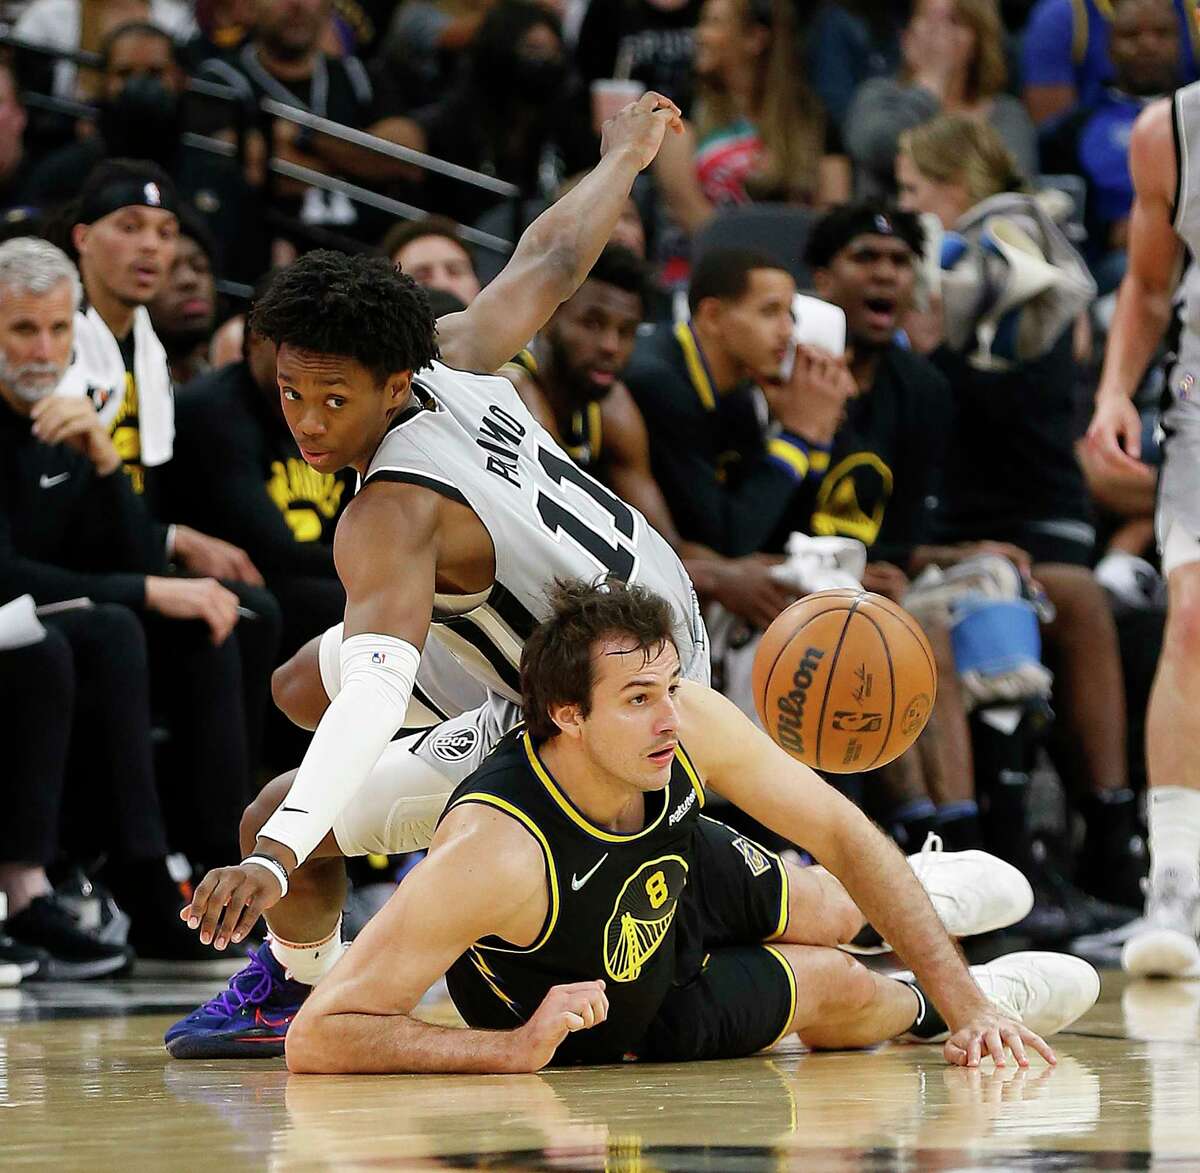 SAN ANTONIO, TX - APRIL 9: Nemanja Bjelica #8 of the Golden State Warriors steals the ball from Josh Primo #11 of the San Antonio Spurs in the second half at AT&T Center on April 9, 2022 in San Antonio, Texas. NOTE TO USER: User expressly acknowledges and agrees that, by downloading and or using this photograph, User is consenting to terms and conditions of the Getty Images License Agreement. (Photo by Ronald Cortes/Getty Images)